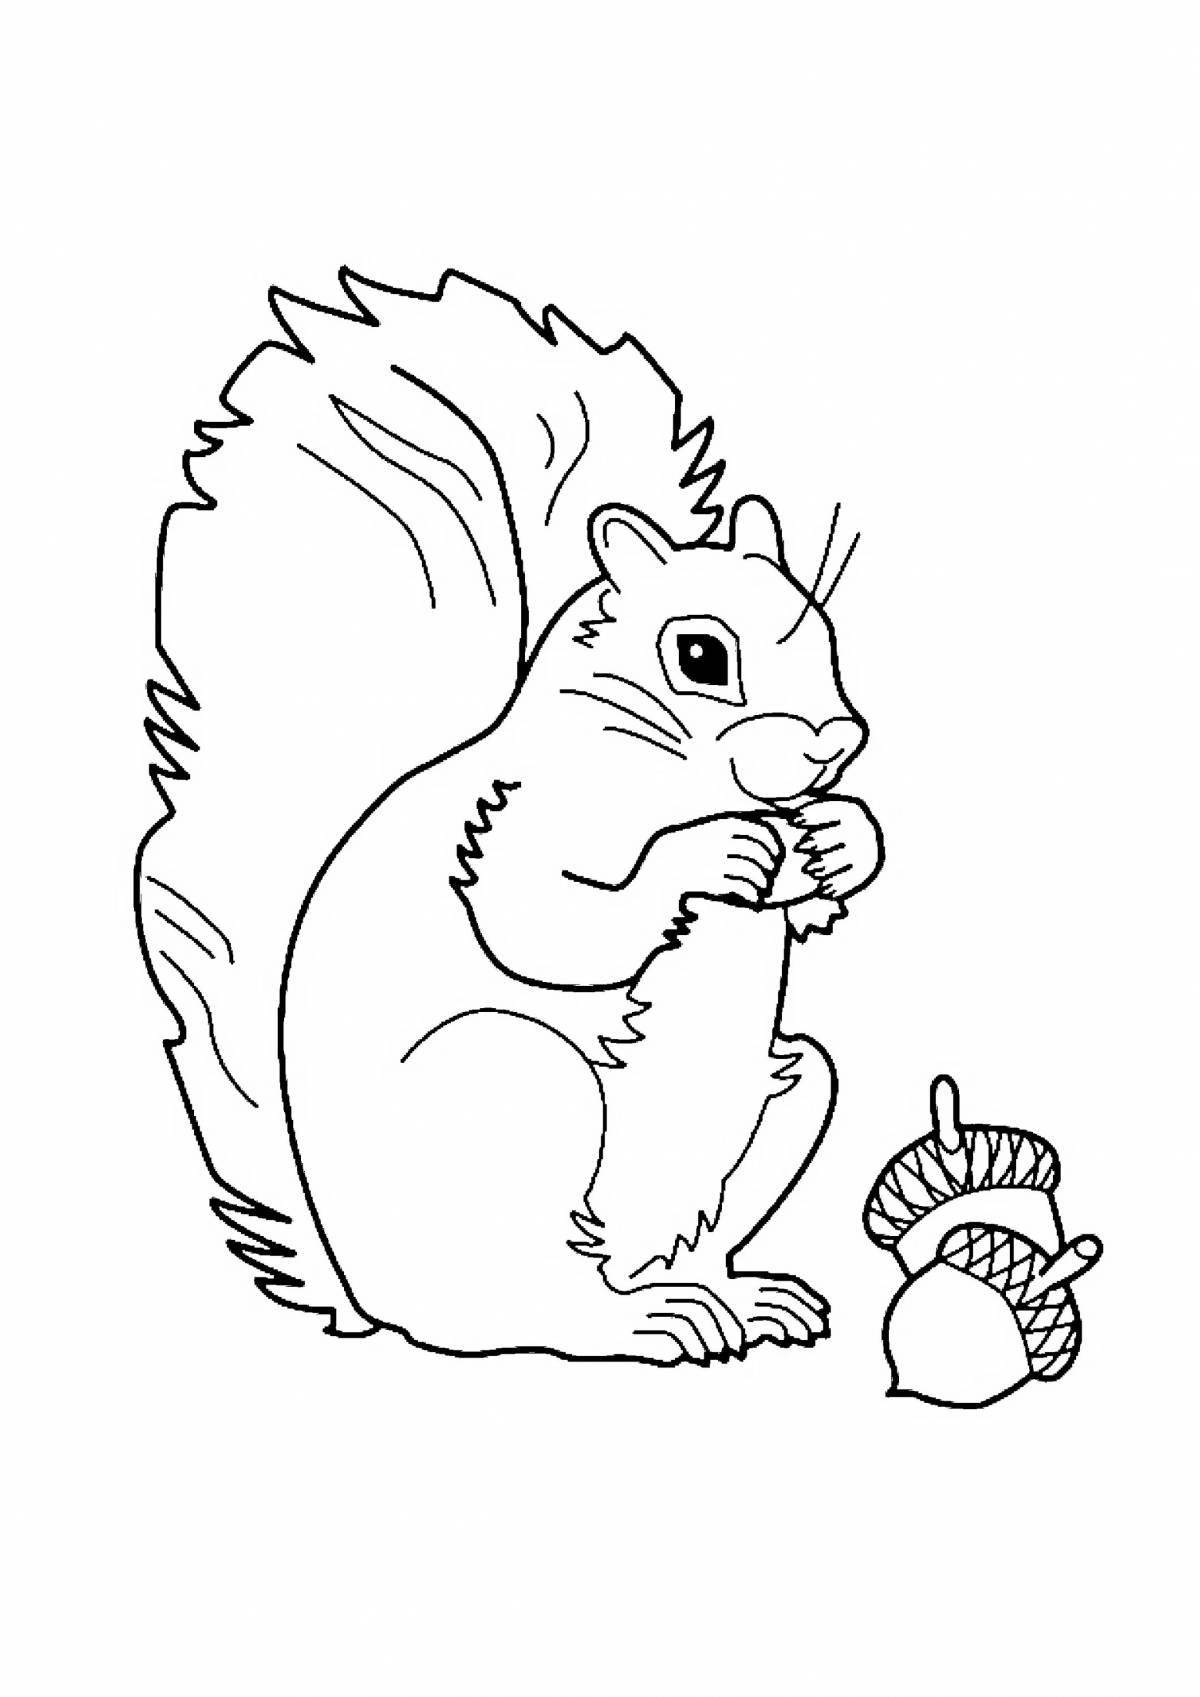 Joyful coloring of a squirrel with a bump